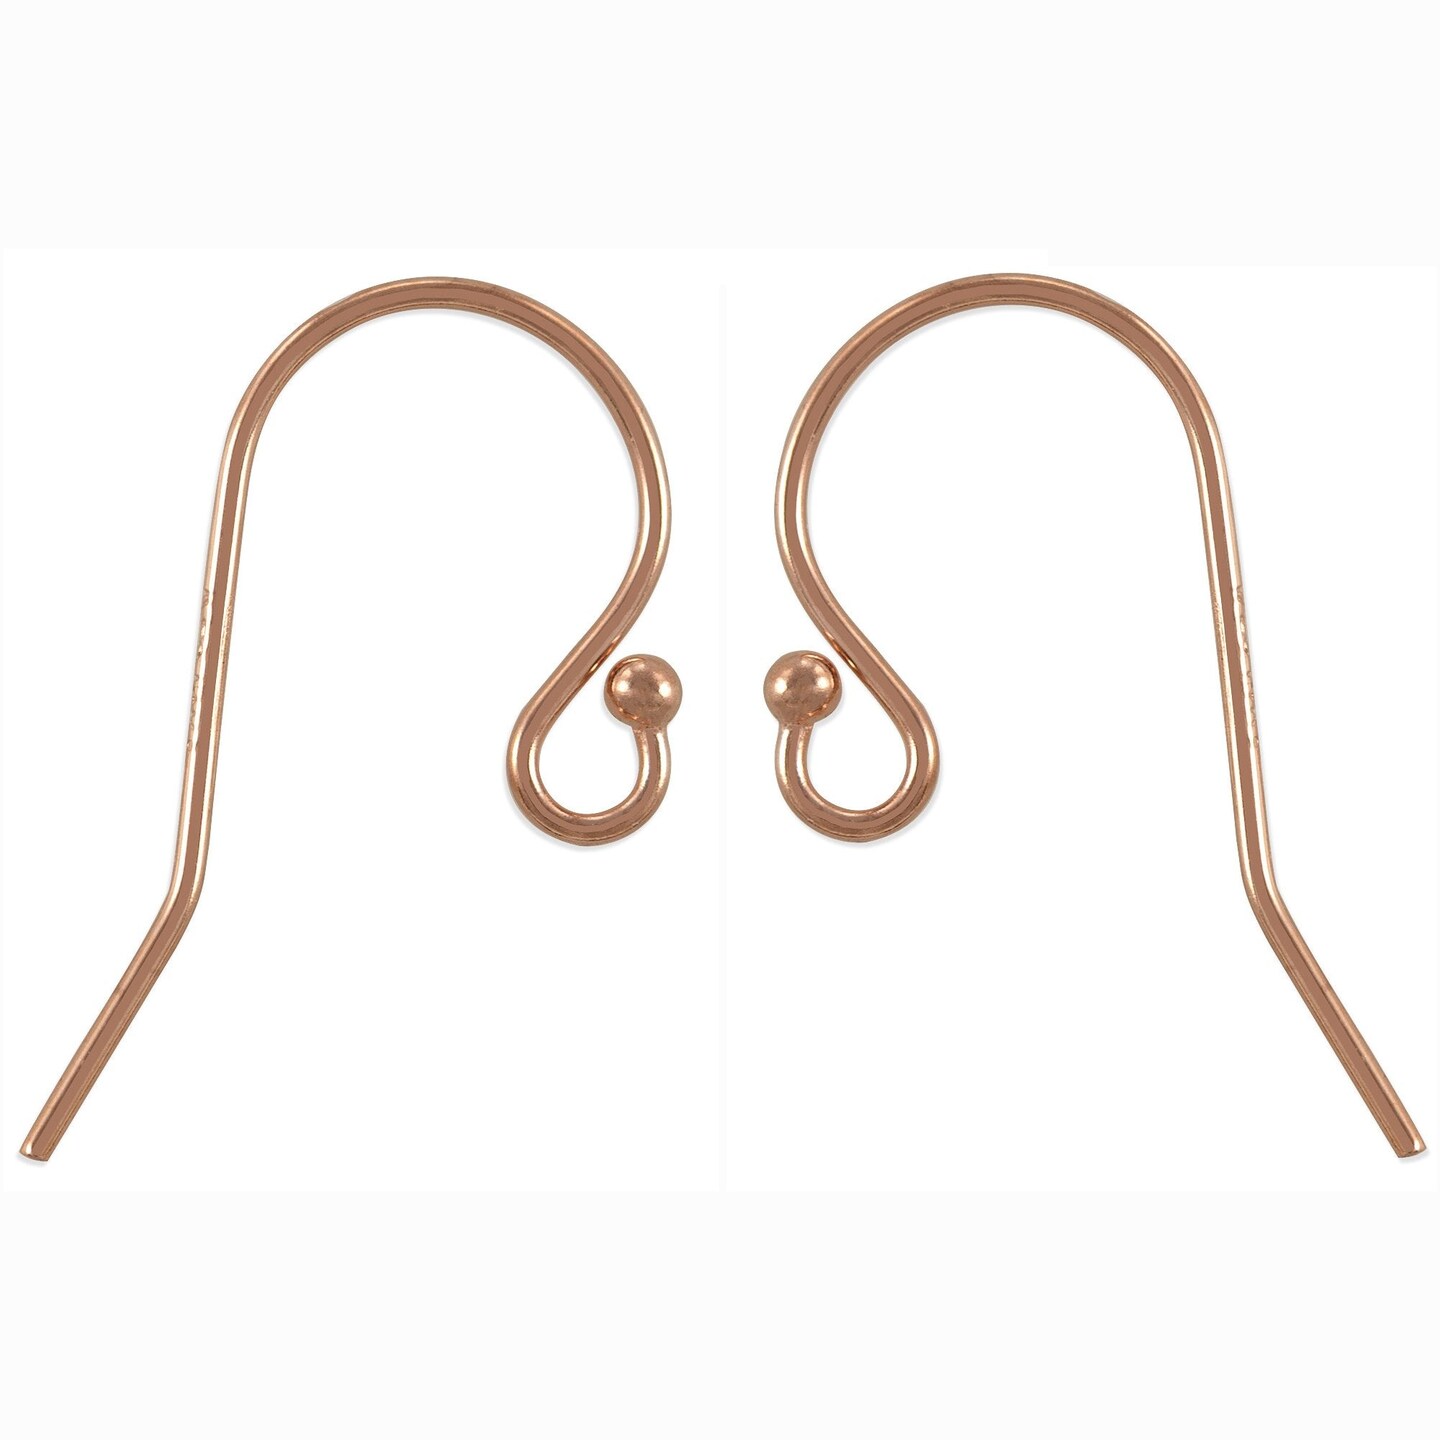 14k Rose-Gold-Filled Earring Wires with Loop for Jewelry Making, 1 Pair